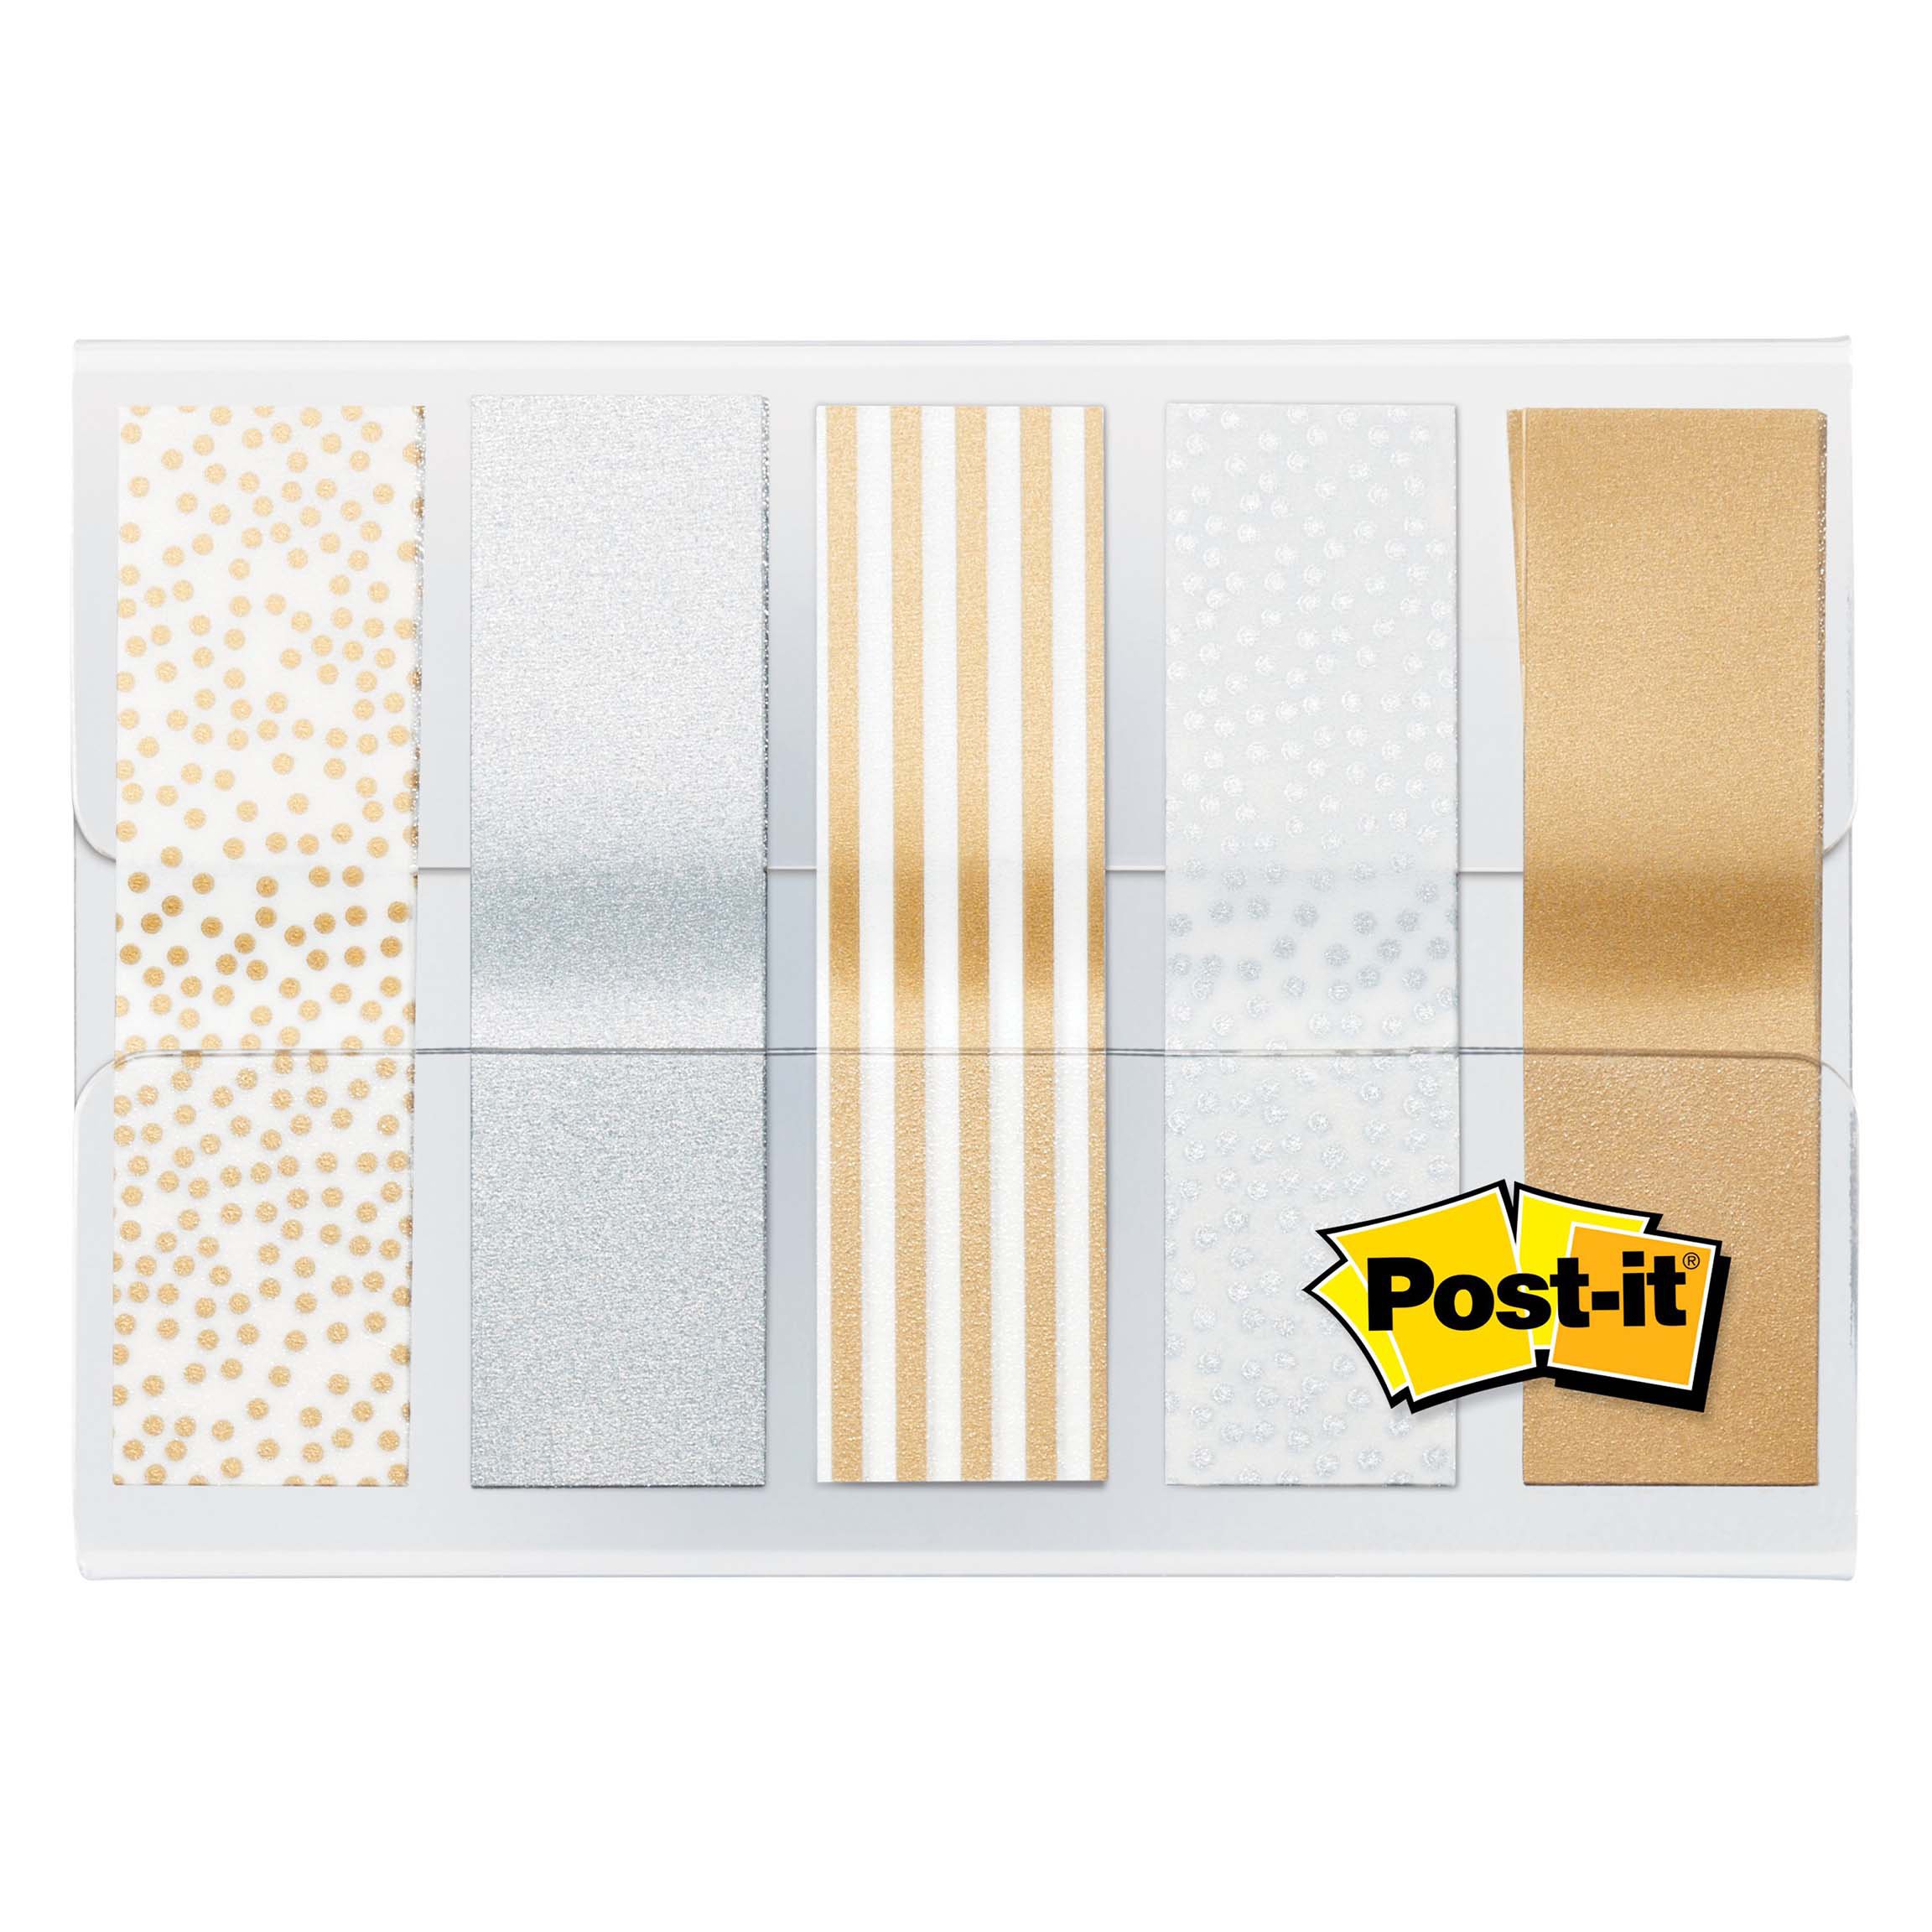 Post-it Tabs And Flags - Shop Sticky Notes & Index Cards at H-E-B